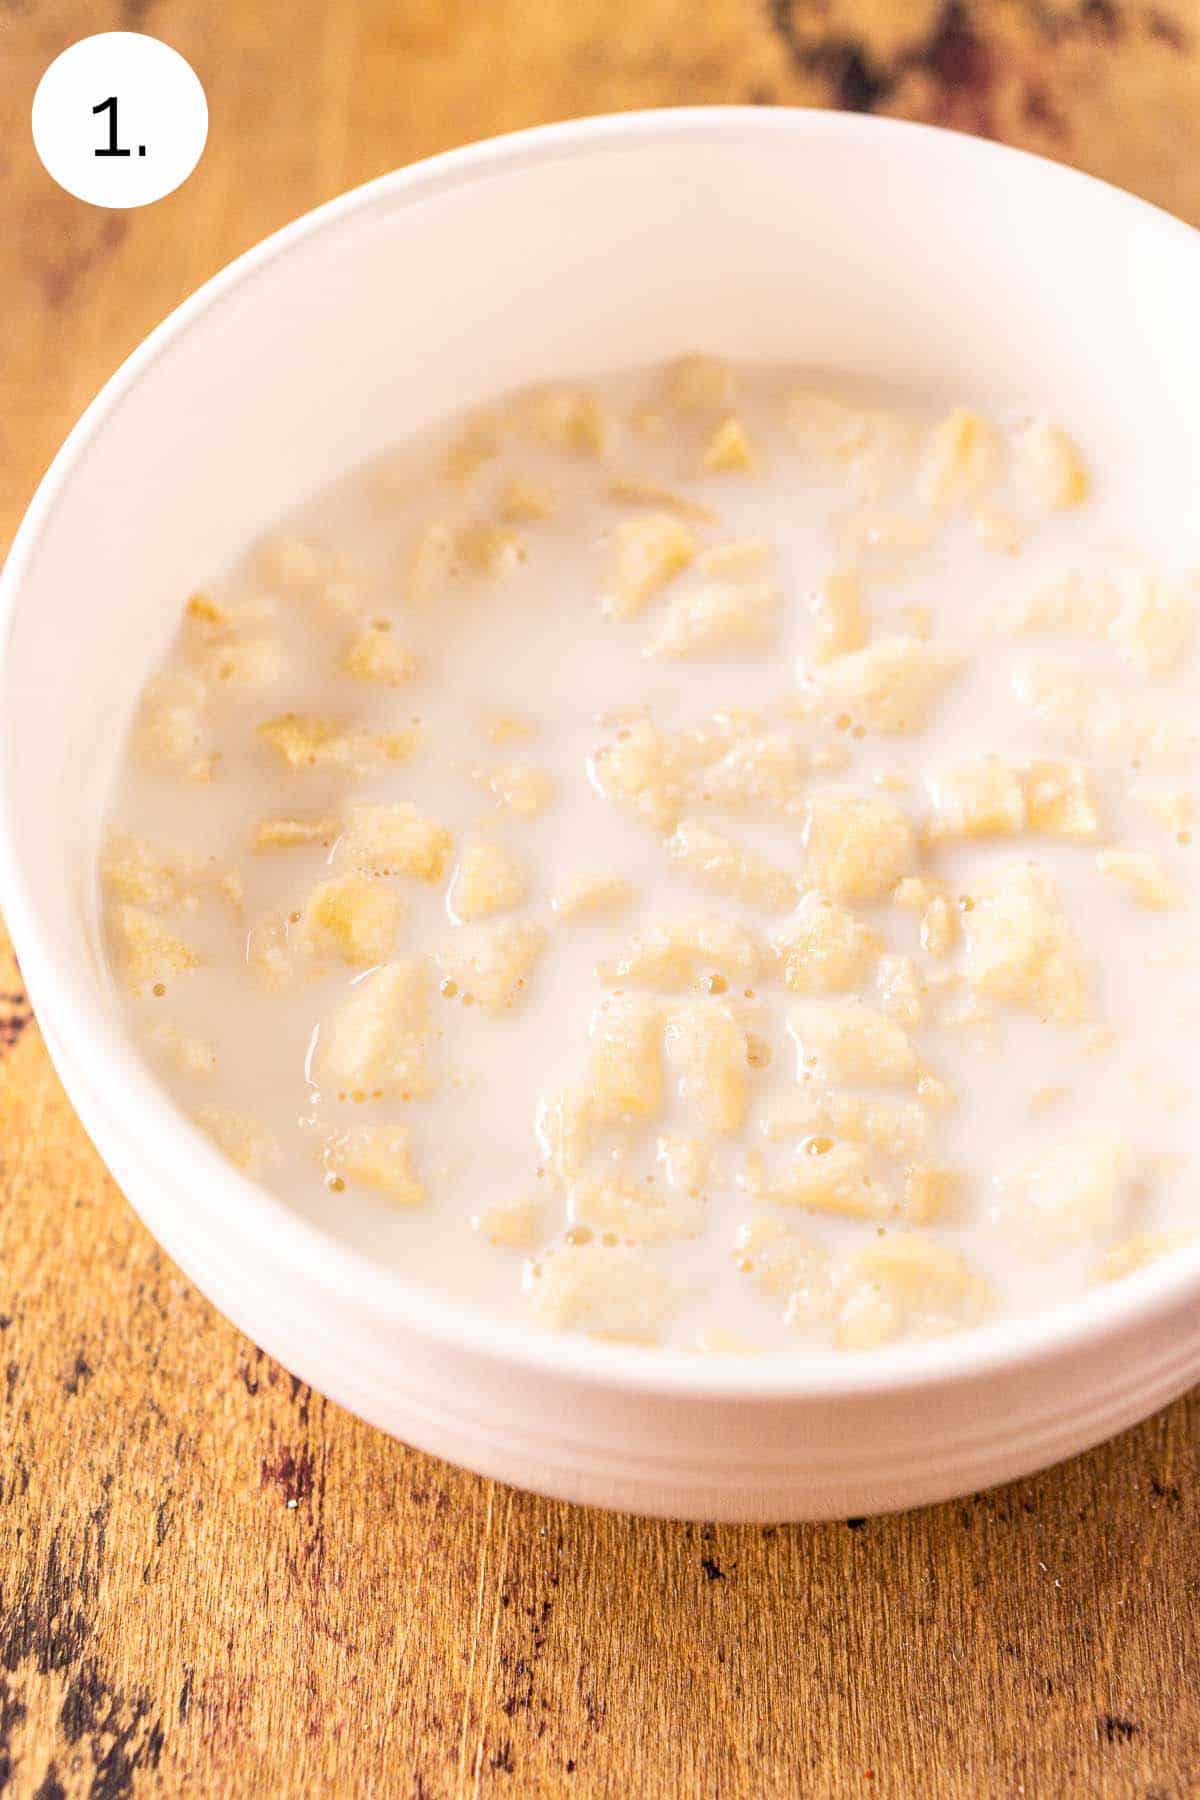 The soft bread crumbs soaking in a small white bowl full of milk on a wooden surface.